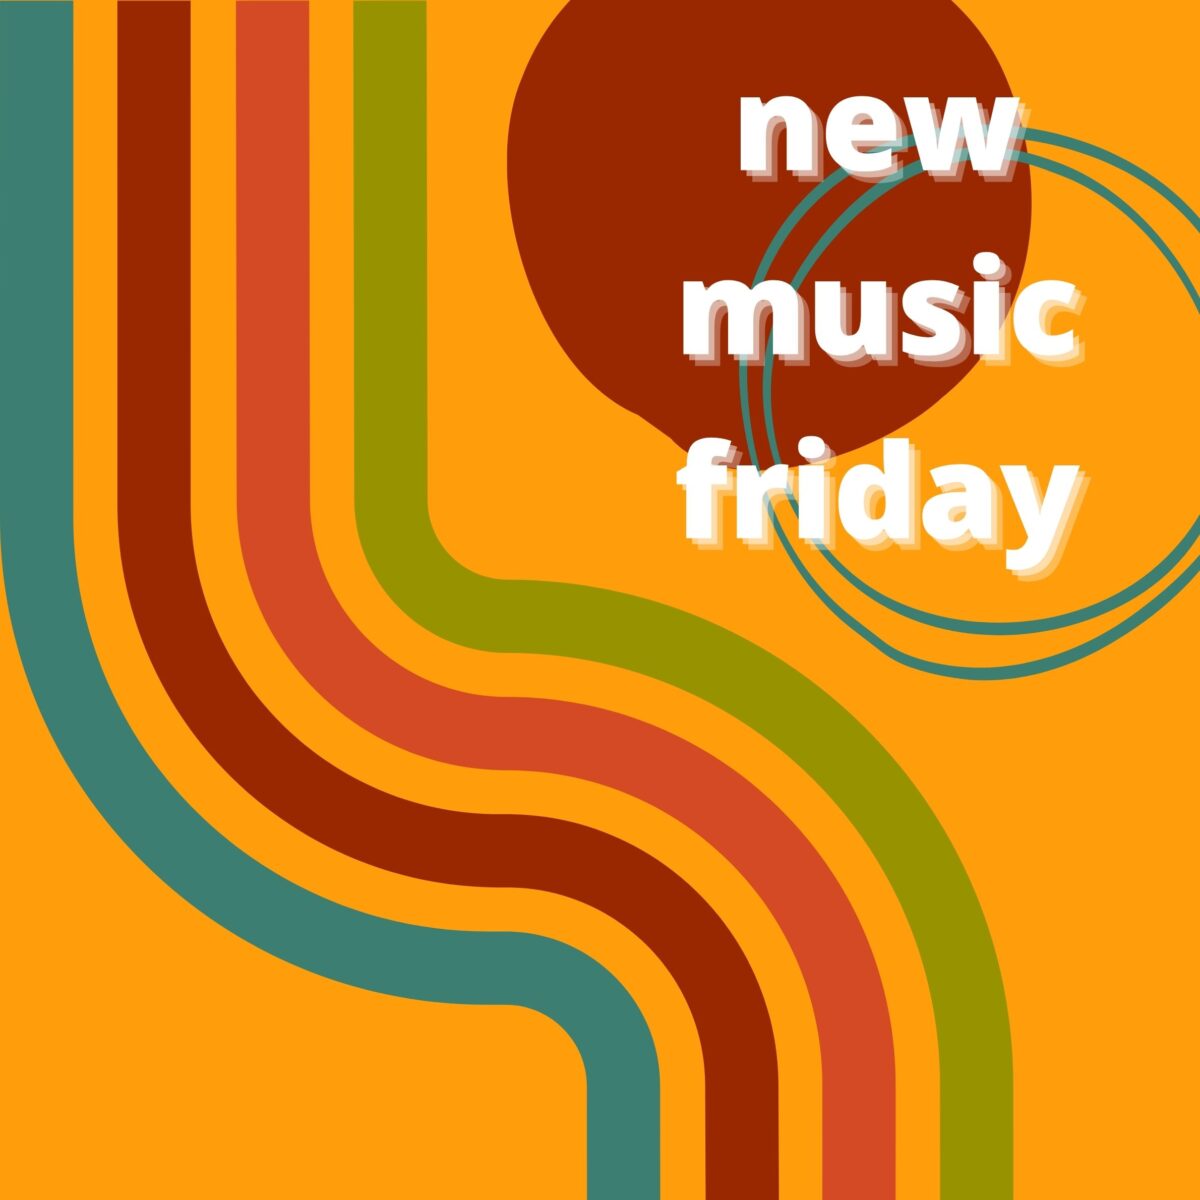 Orange background with blue red orange and green stripes. White text that reads "new music friday."